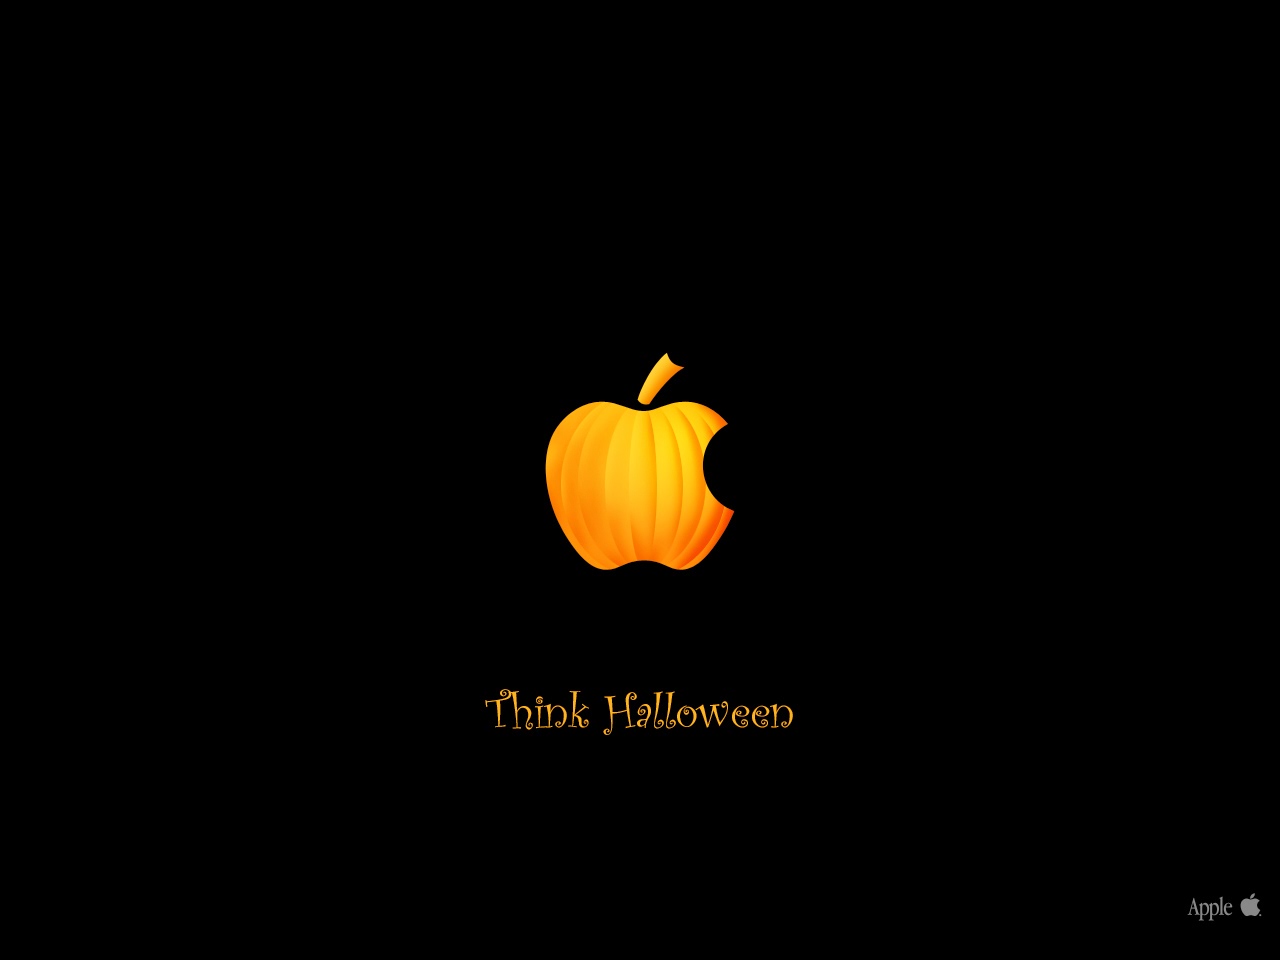 45+ Halloween Wallpapers for your desktop | Most beautiful places in